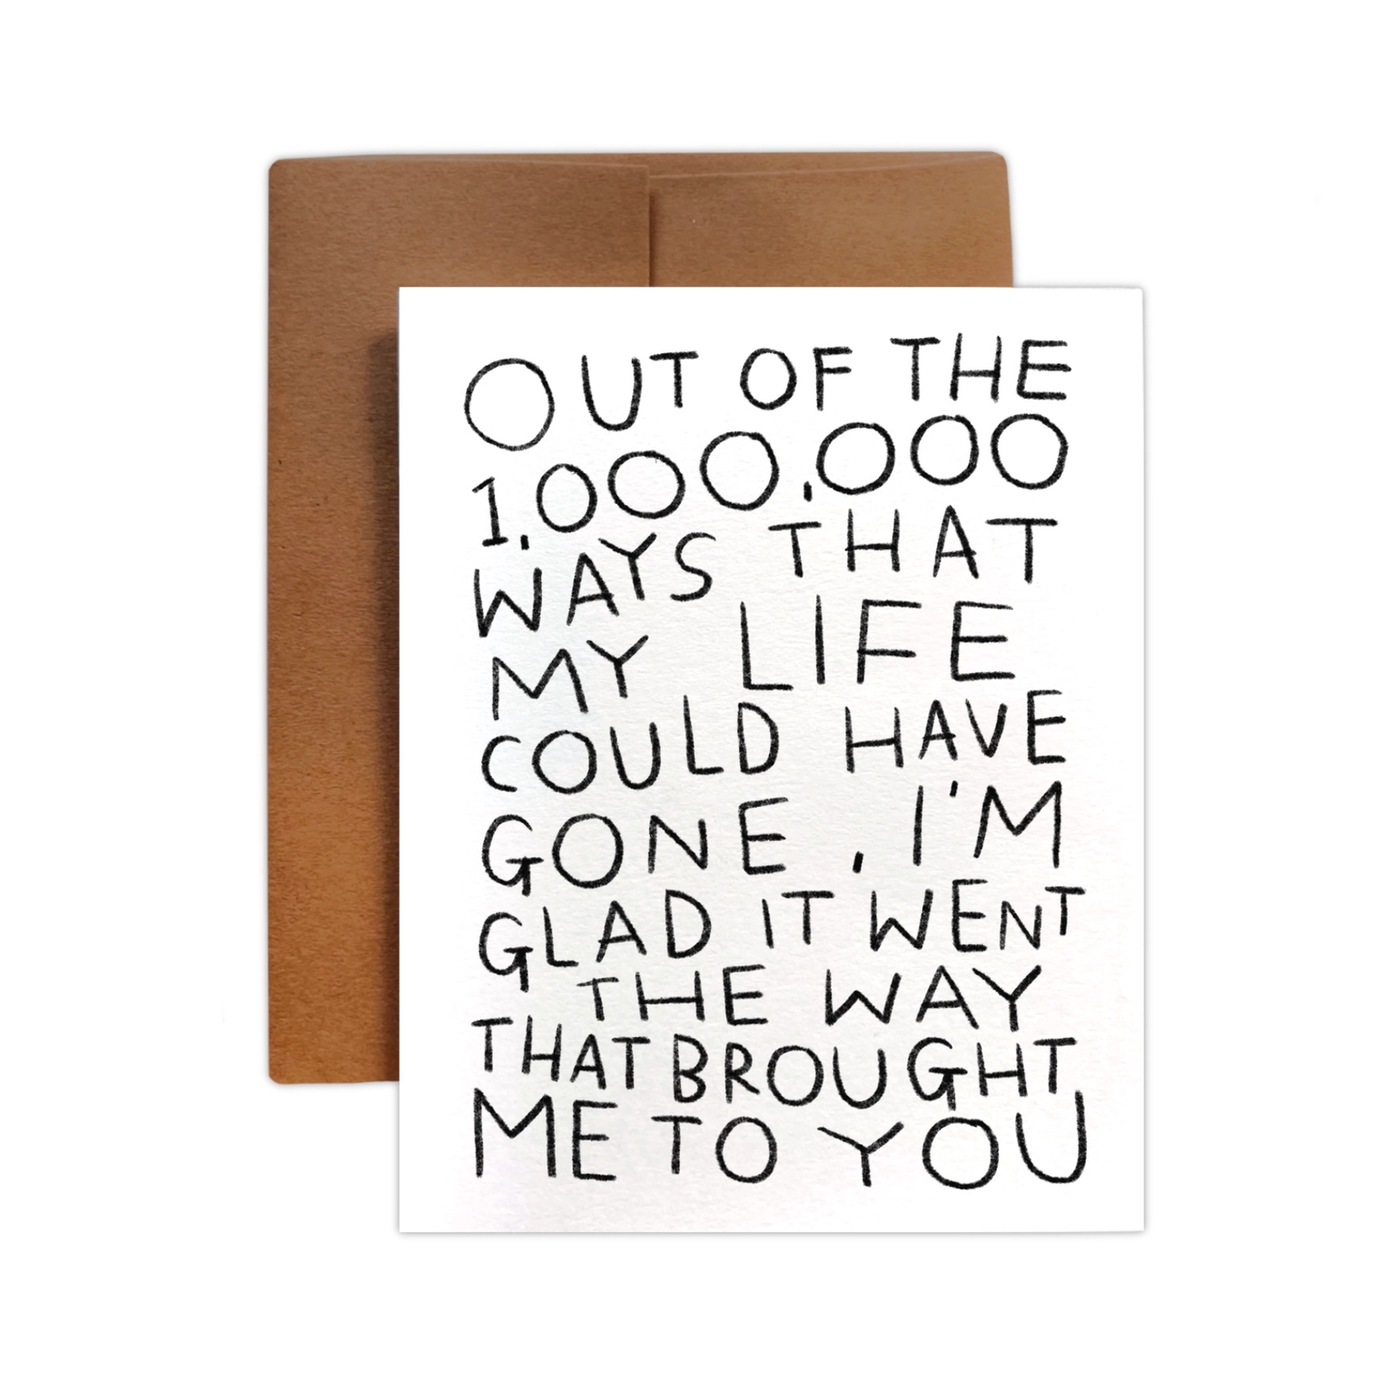 Brought Me To You Greeting Card